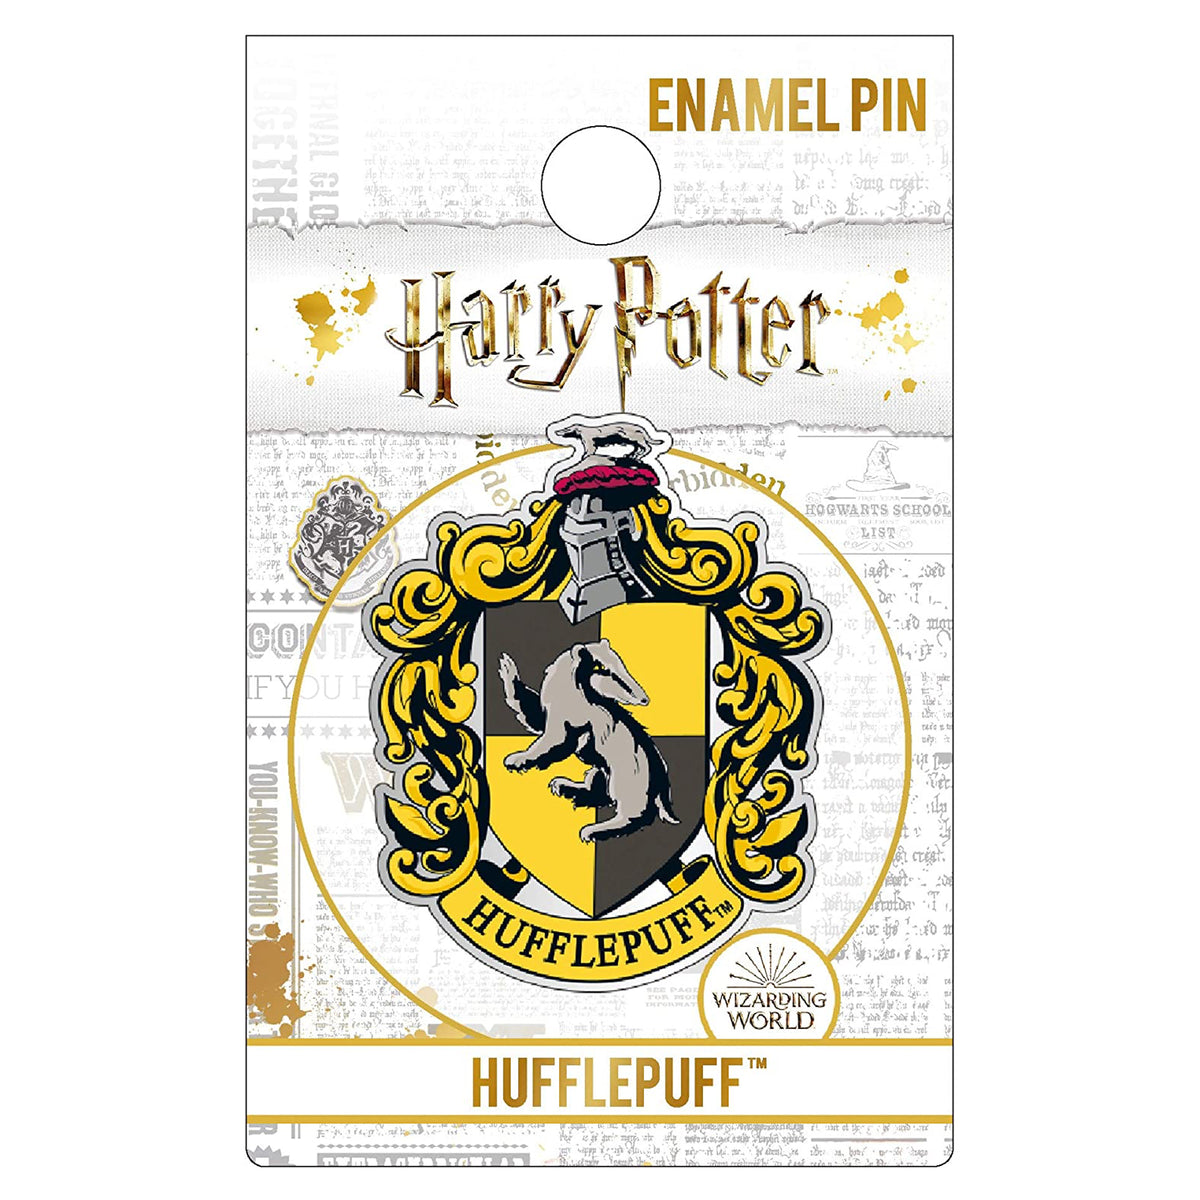 Harry Potter Hufflepuff Crest Collectible Enamel Pin